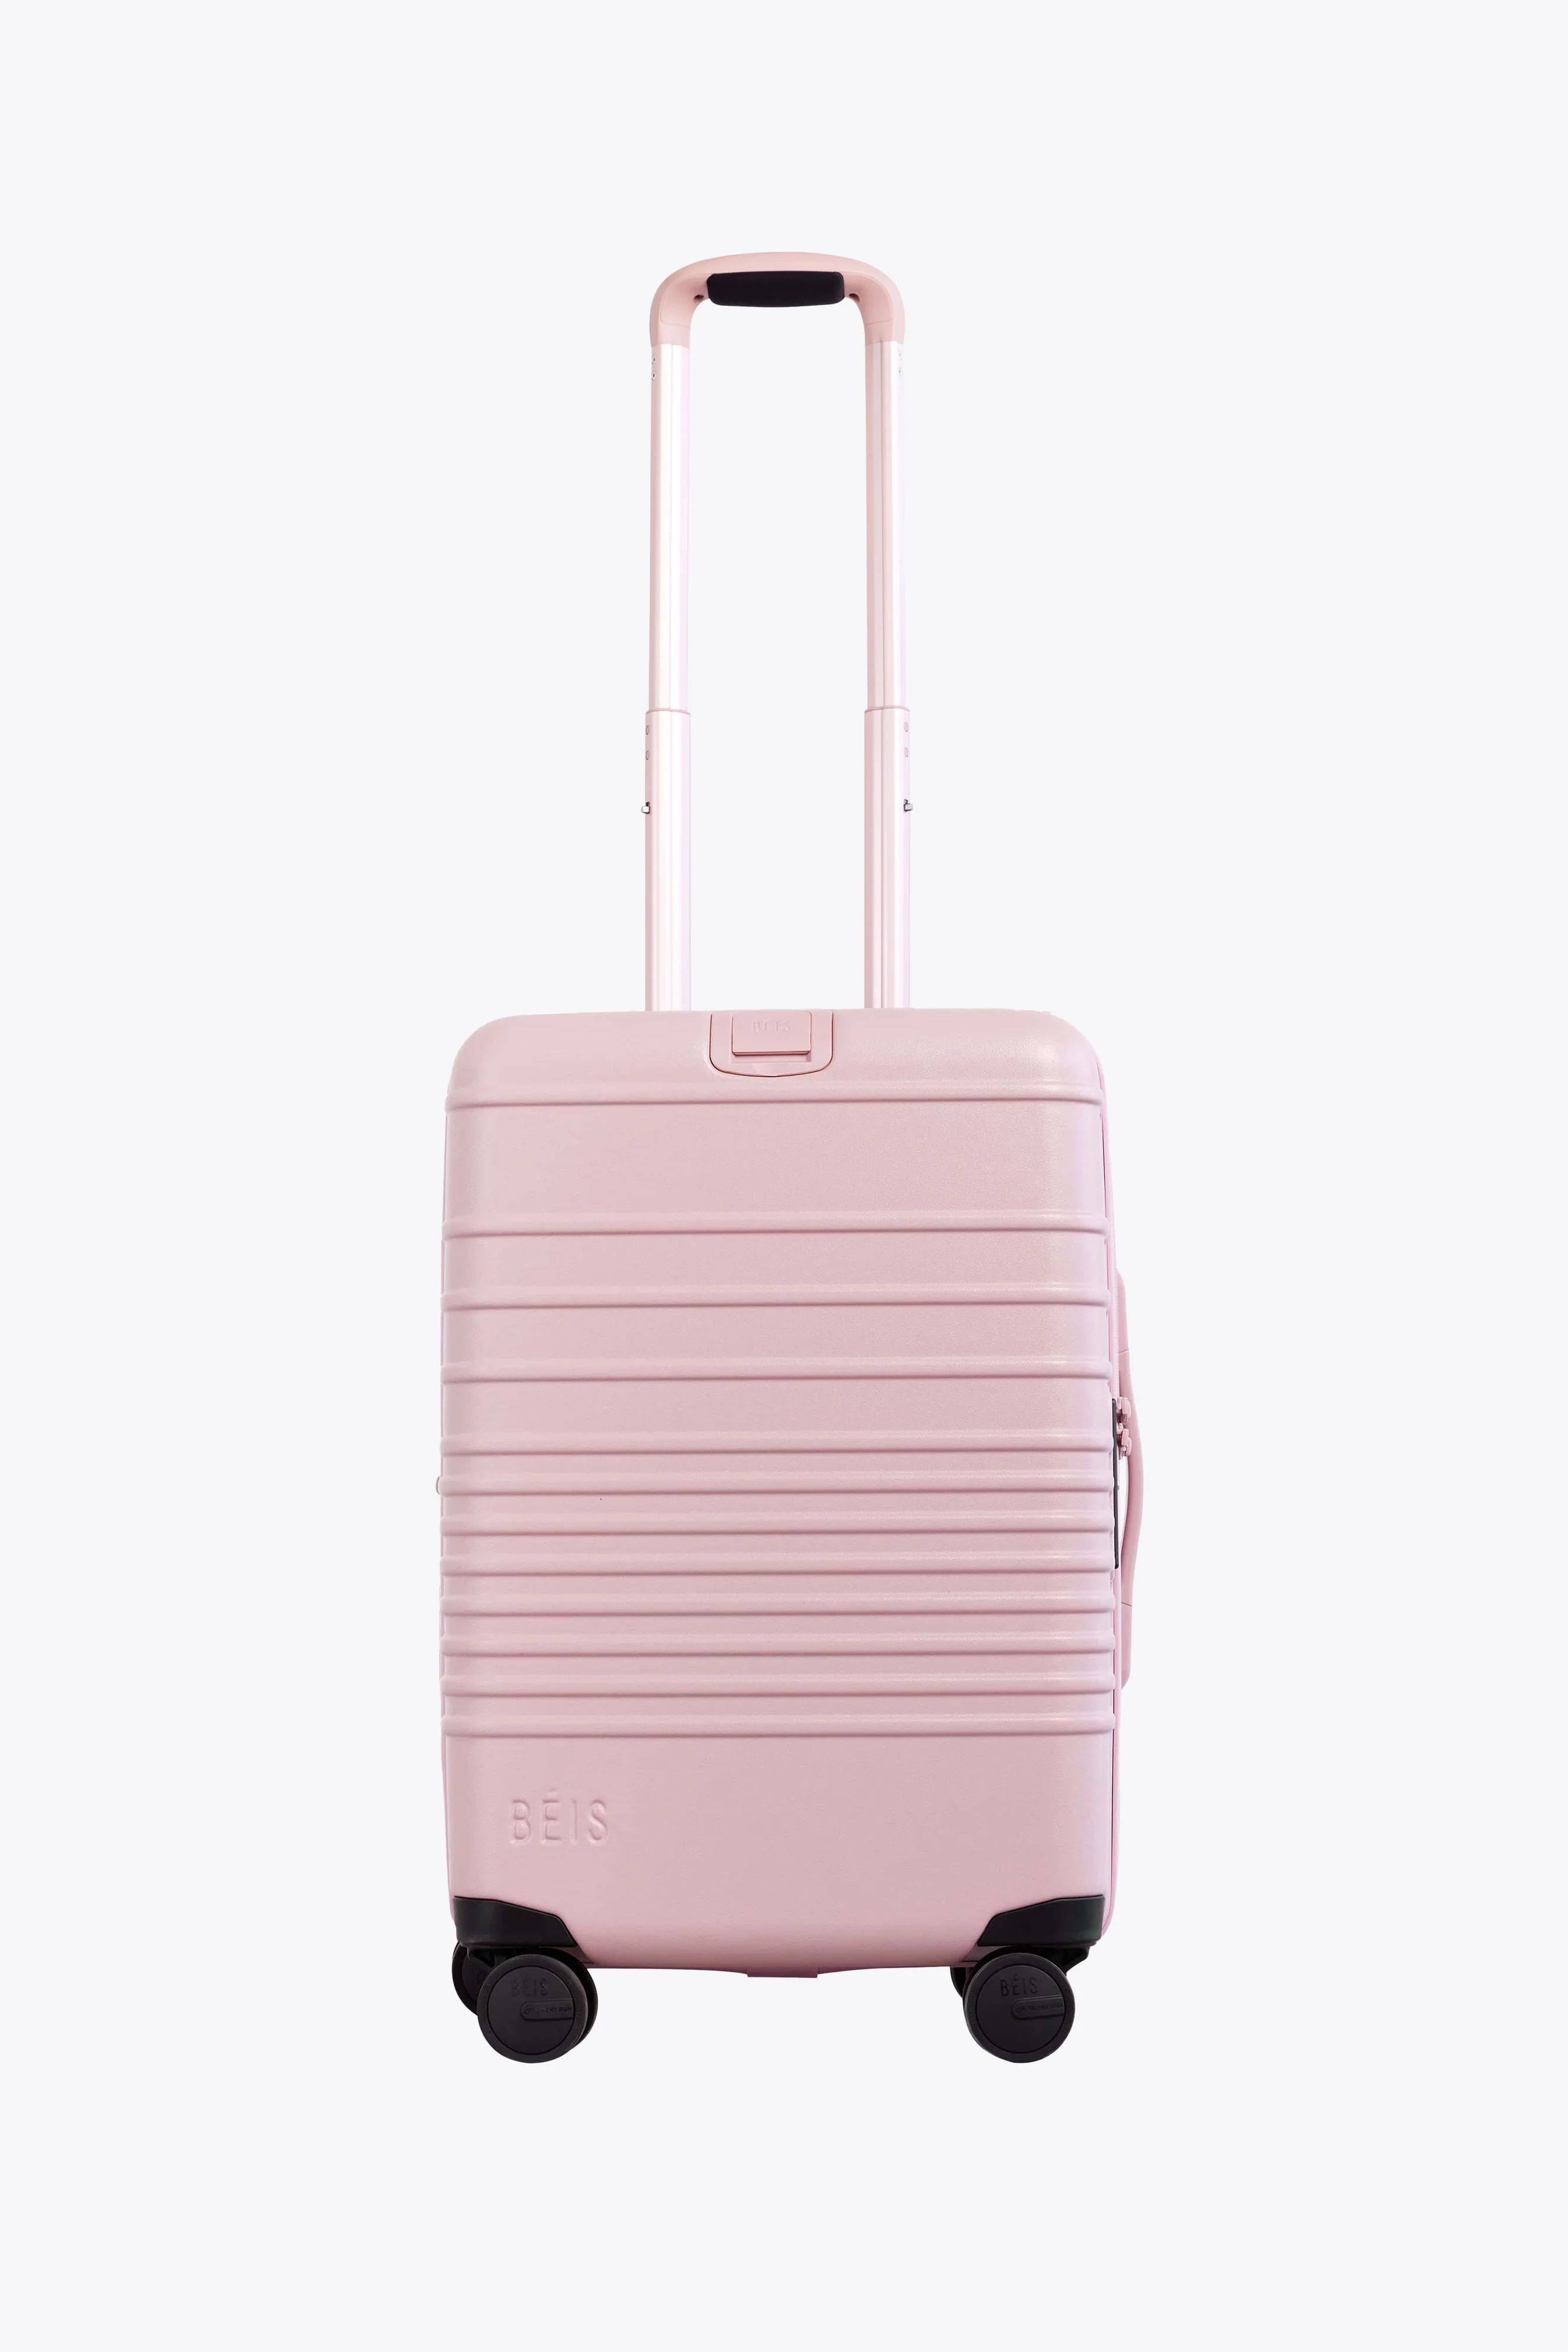 BÉIS 'The Carry On Roller' in Atlas Pink - Pink Suitcase & Pink Carry On 21" Luggage | BÉIS Travel